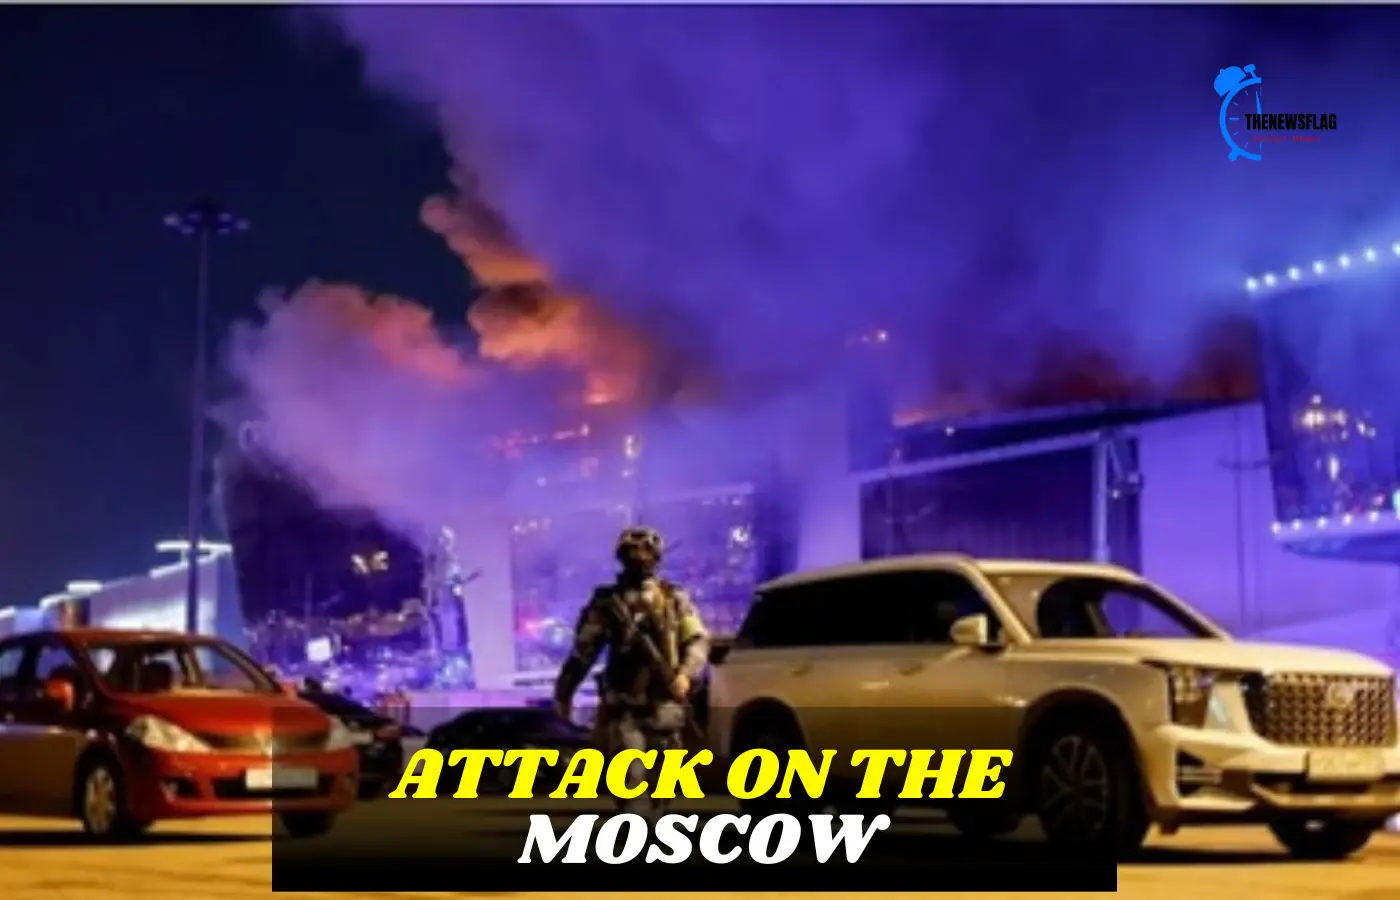 What is known about the attack on the Moscow concert hall